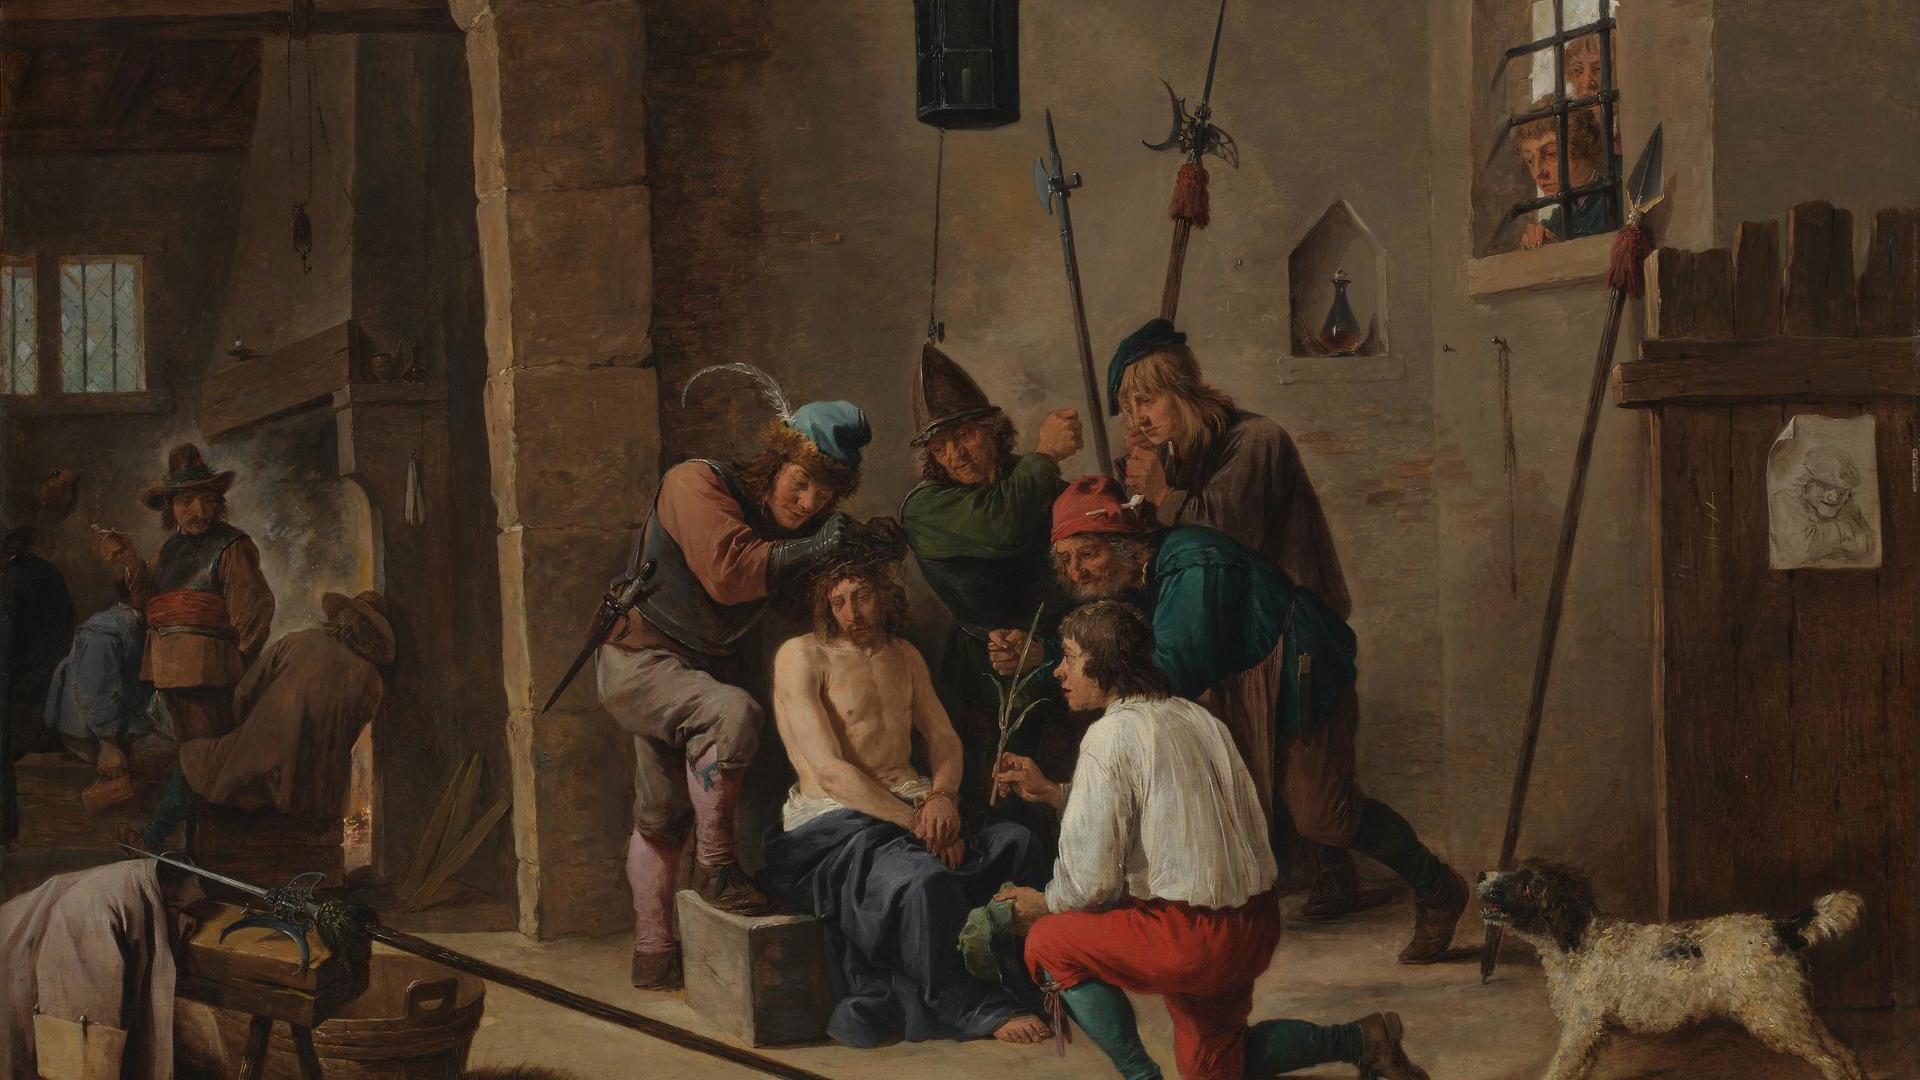 Christ Crowned with Thorns by David Teniers the Younger